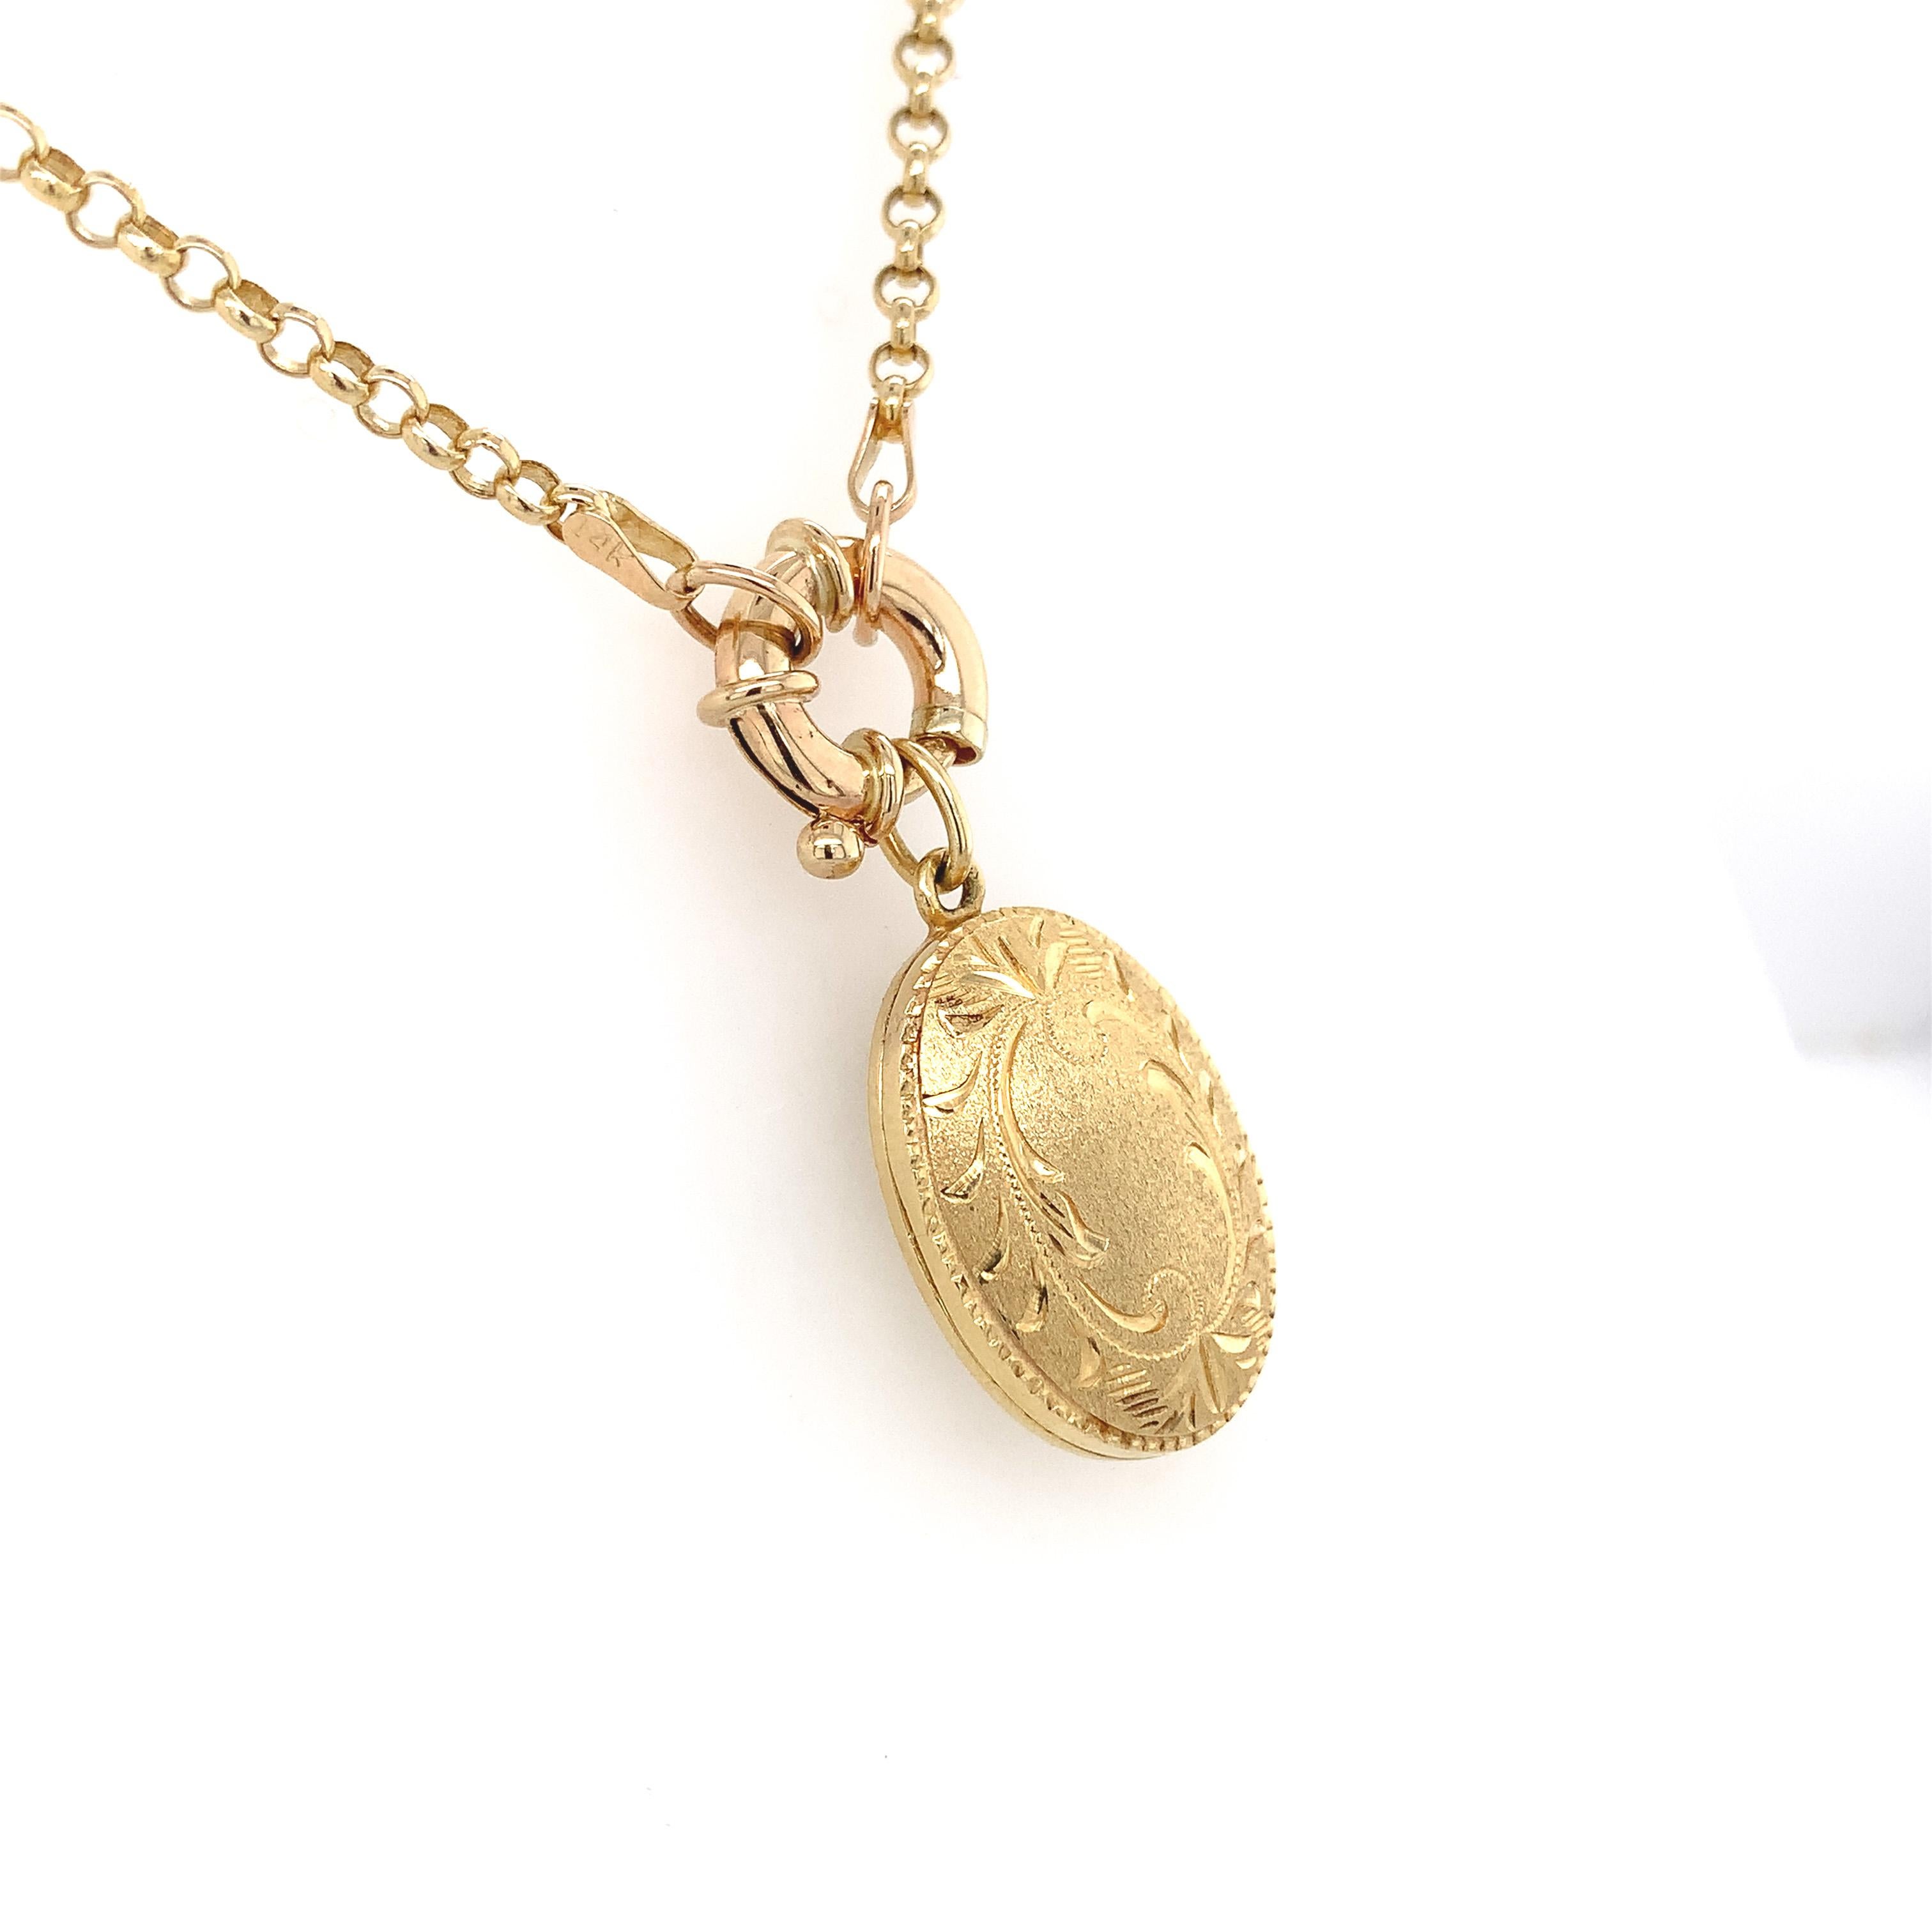 14K yellow gold oval locket on a 14K yellow gold fancy rolo link chain. The locket measures 1 1/8